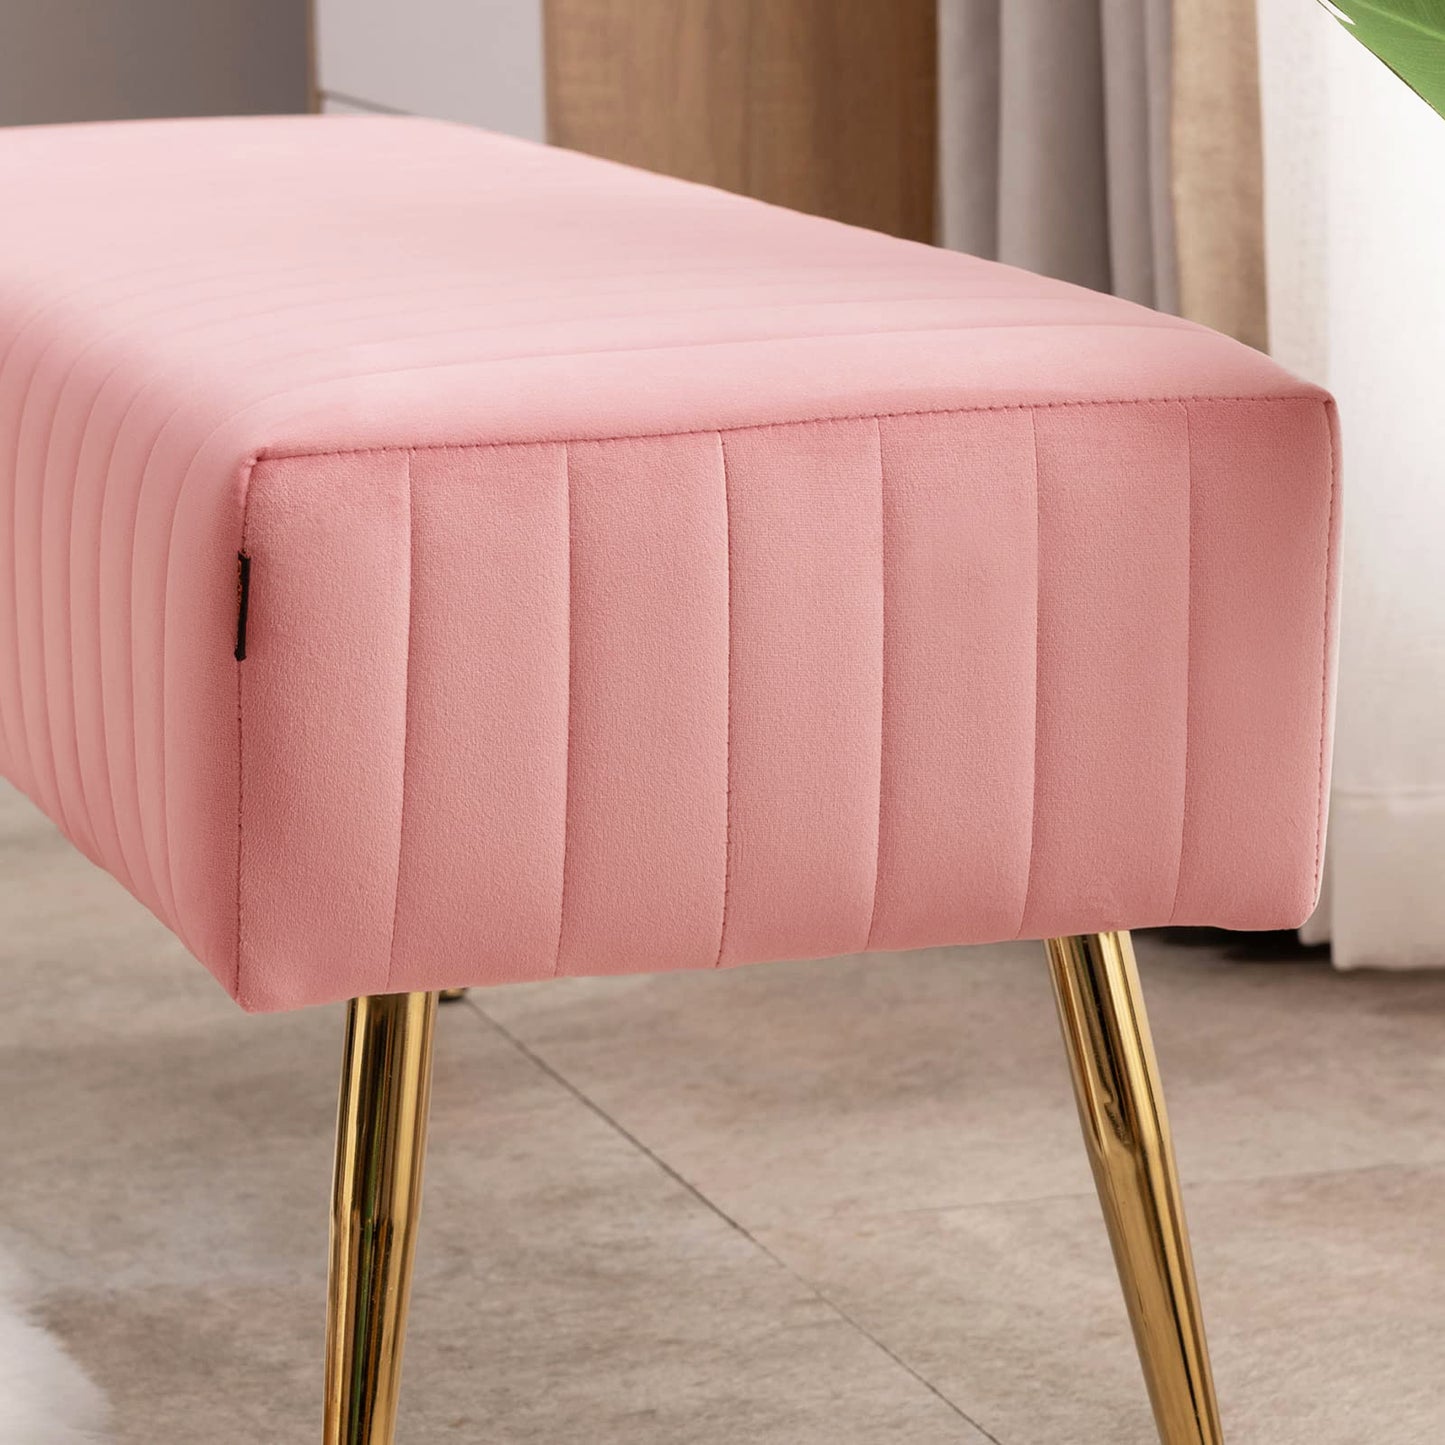 SYNGAR Entryway Bench, Velvet Upholstered Seat Footstool, Rectangular End of Bed Bench with Metal Legs, Ottoman Bench Seat for Bedroom Living Room Hallway, Modern Home Furniture Bed Bench, Pink